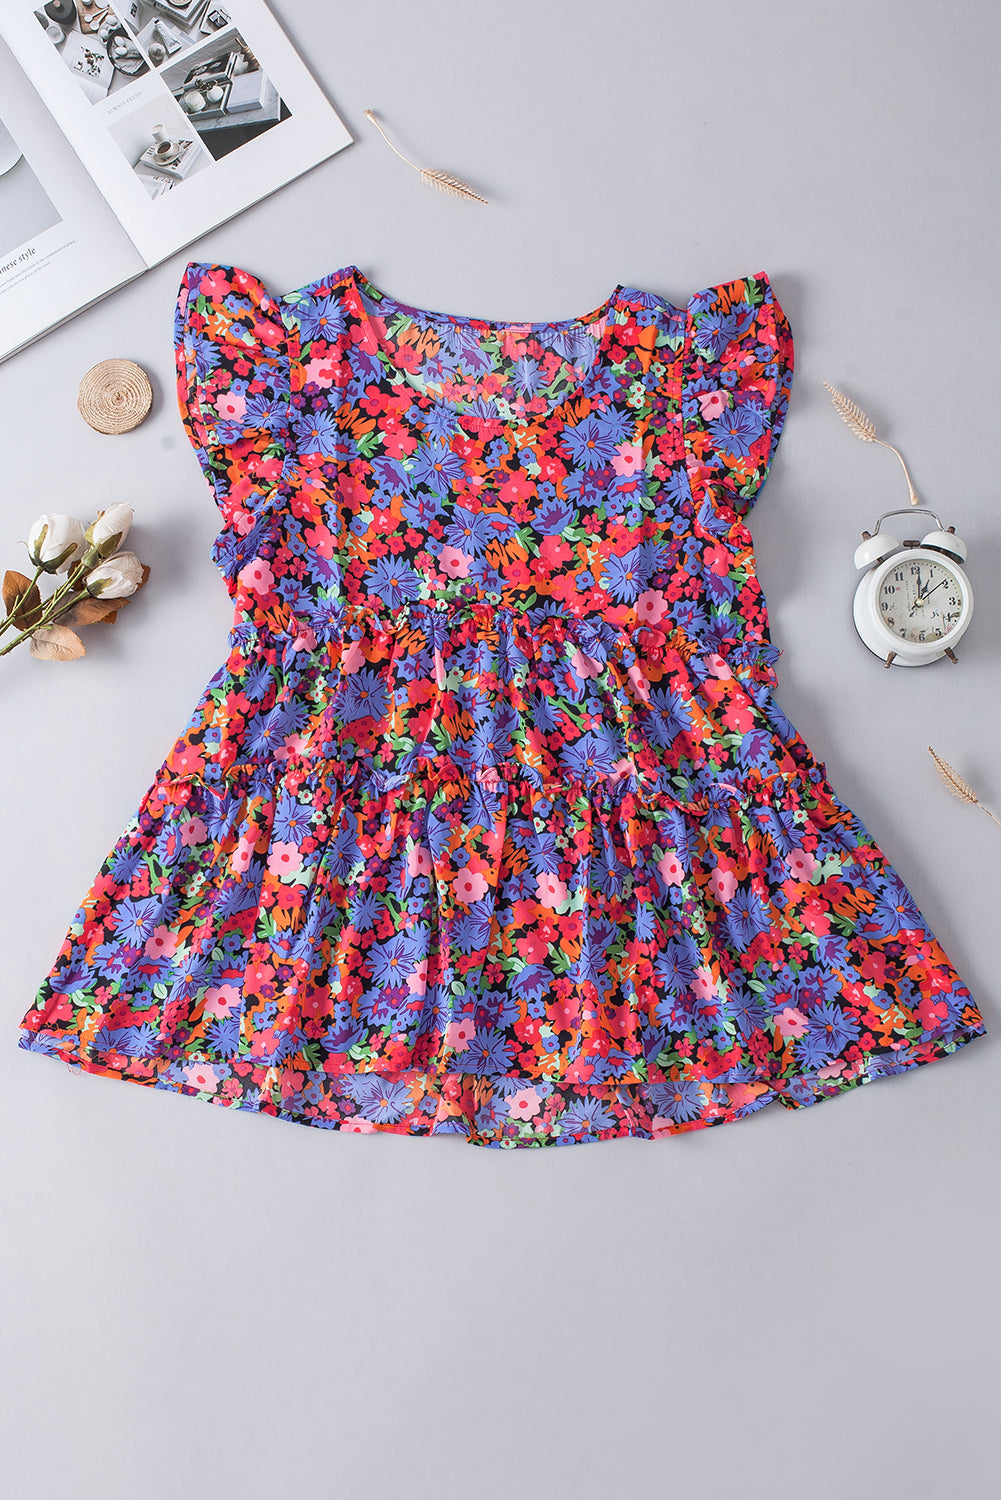 Multicolor Floral Print Ruffle Tiered Short Sleeve Babydoll Top